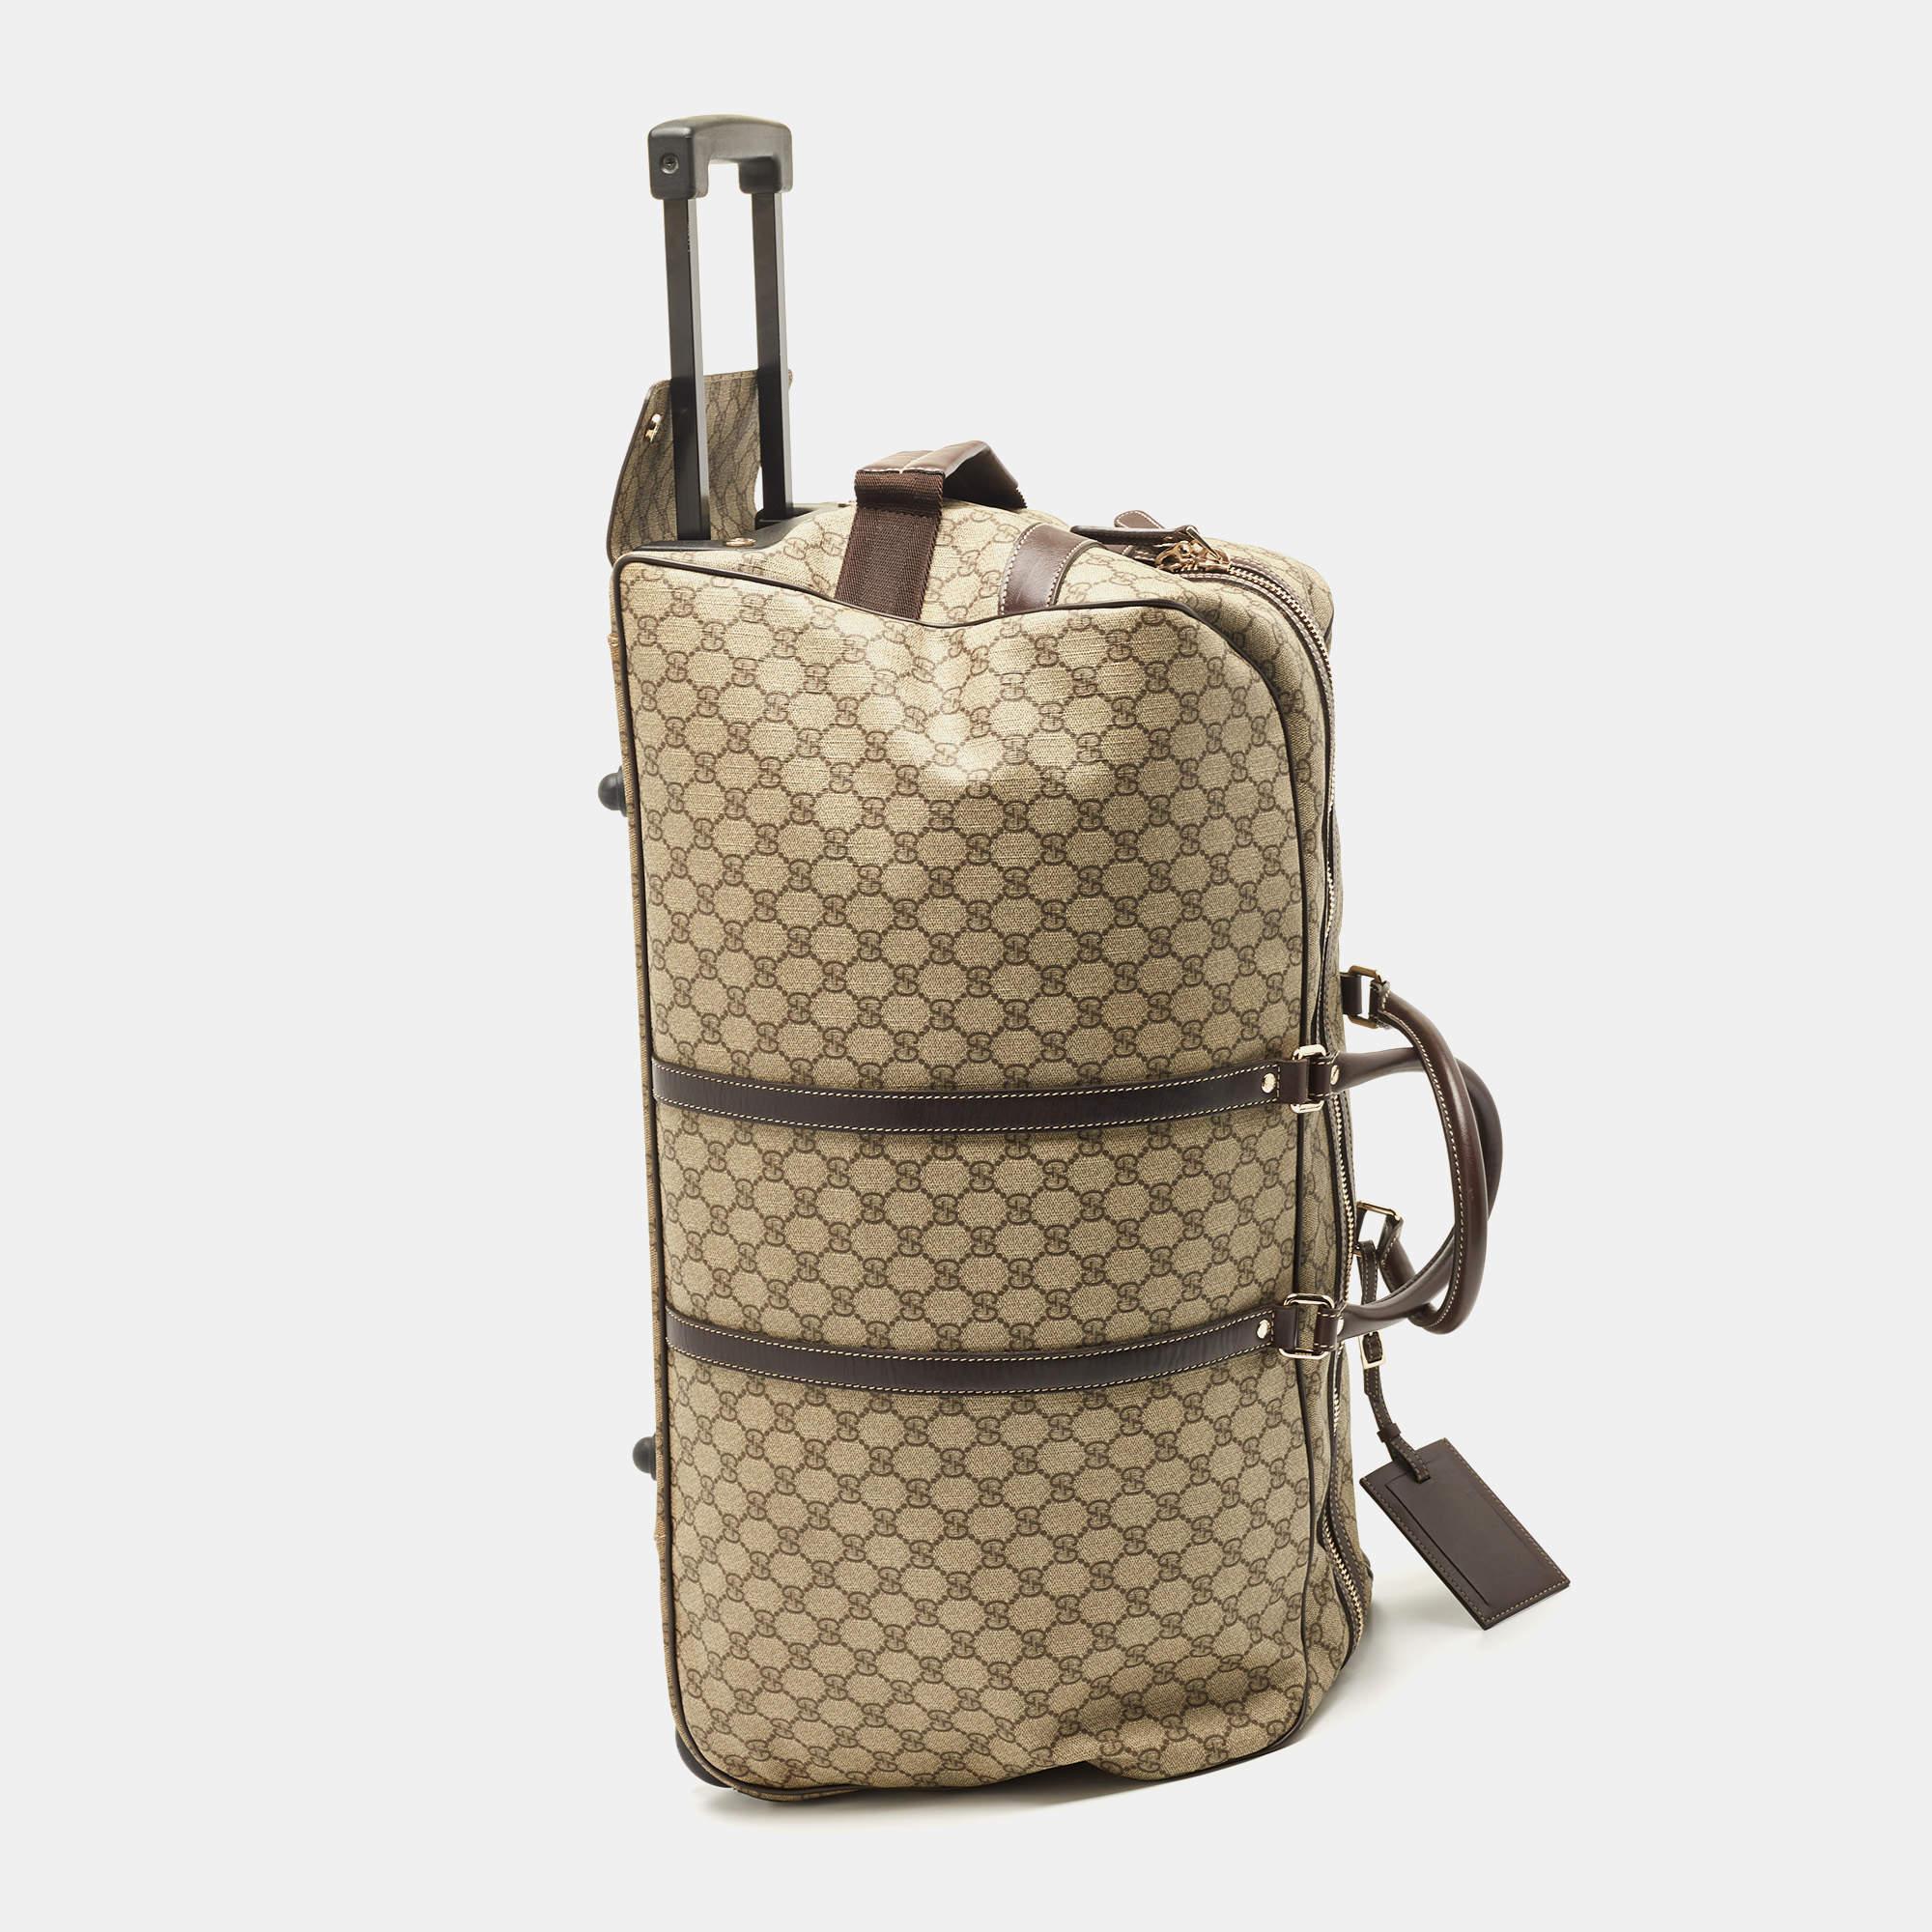 This creation from the house of Gucci is an accessory you will turn to when you have travel plans. It has been crafted using the best kind of materials to be appealing as well as durable. It's a worthy investment.

